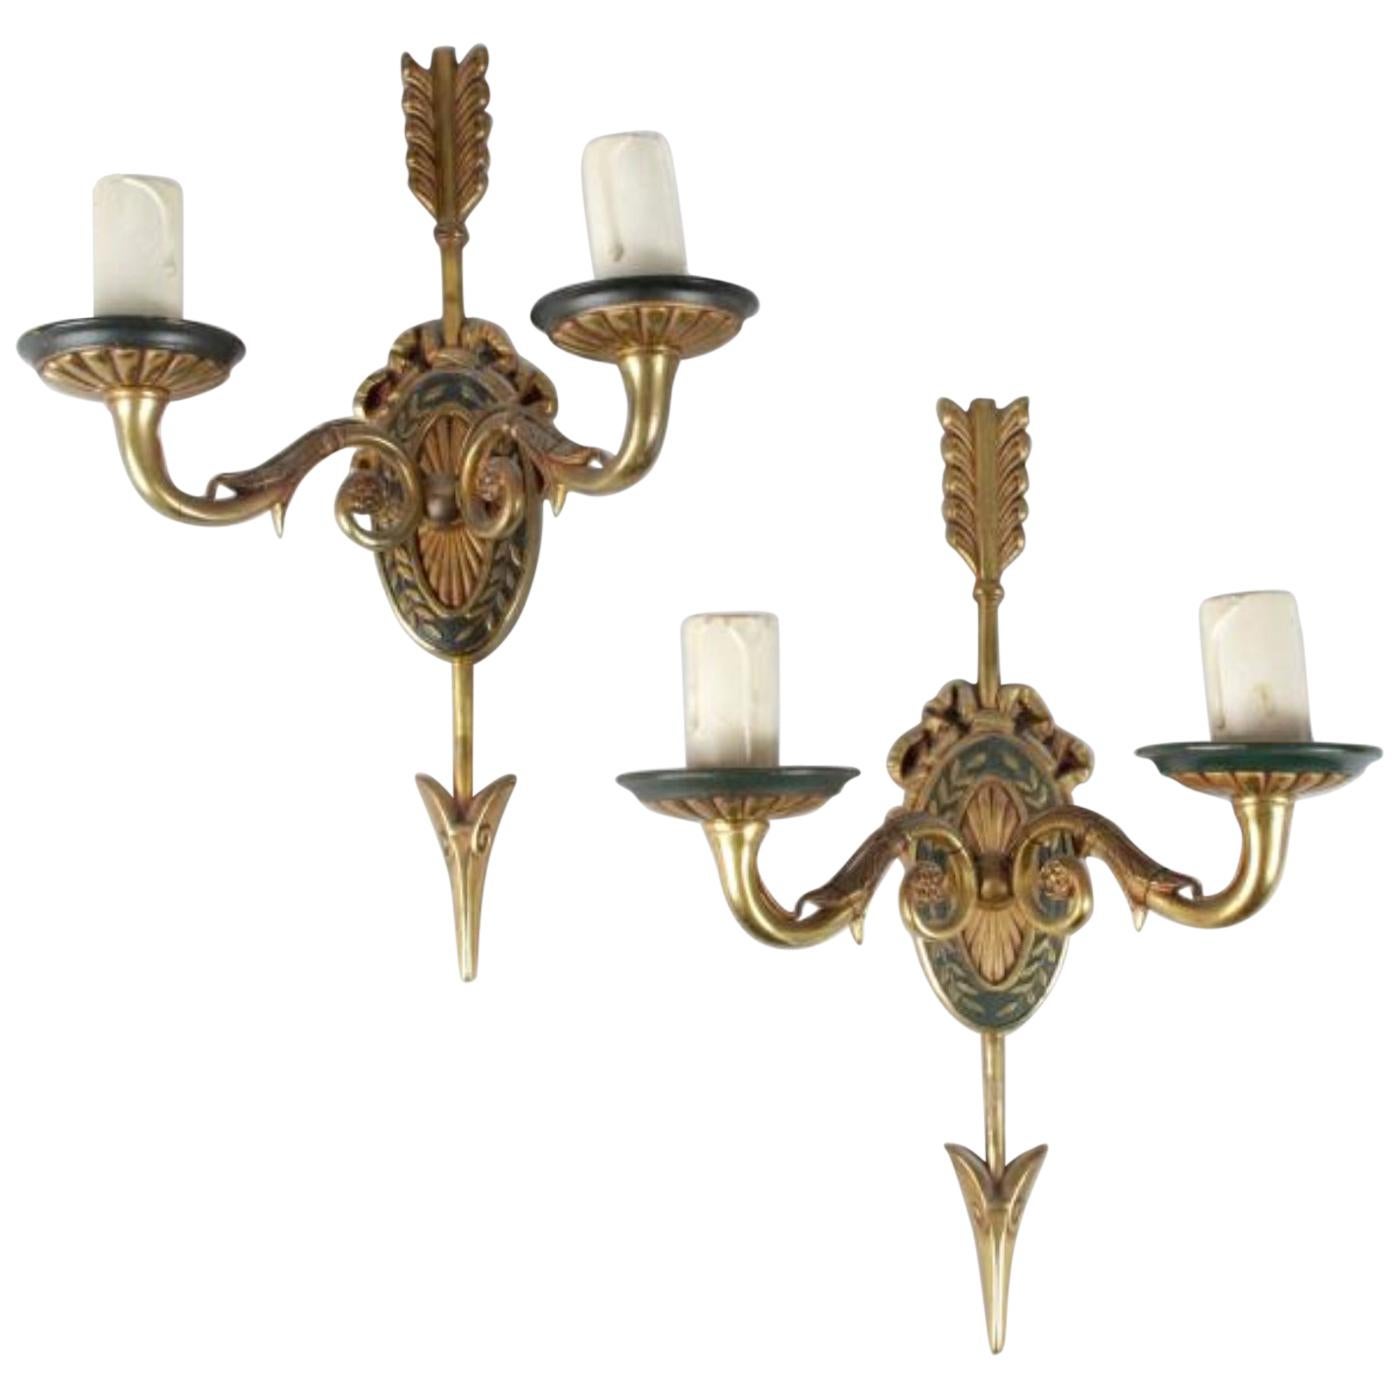 19th Century Pair of French Bronze Wall Sconces in Louis XVI Style